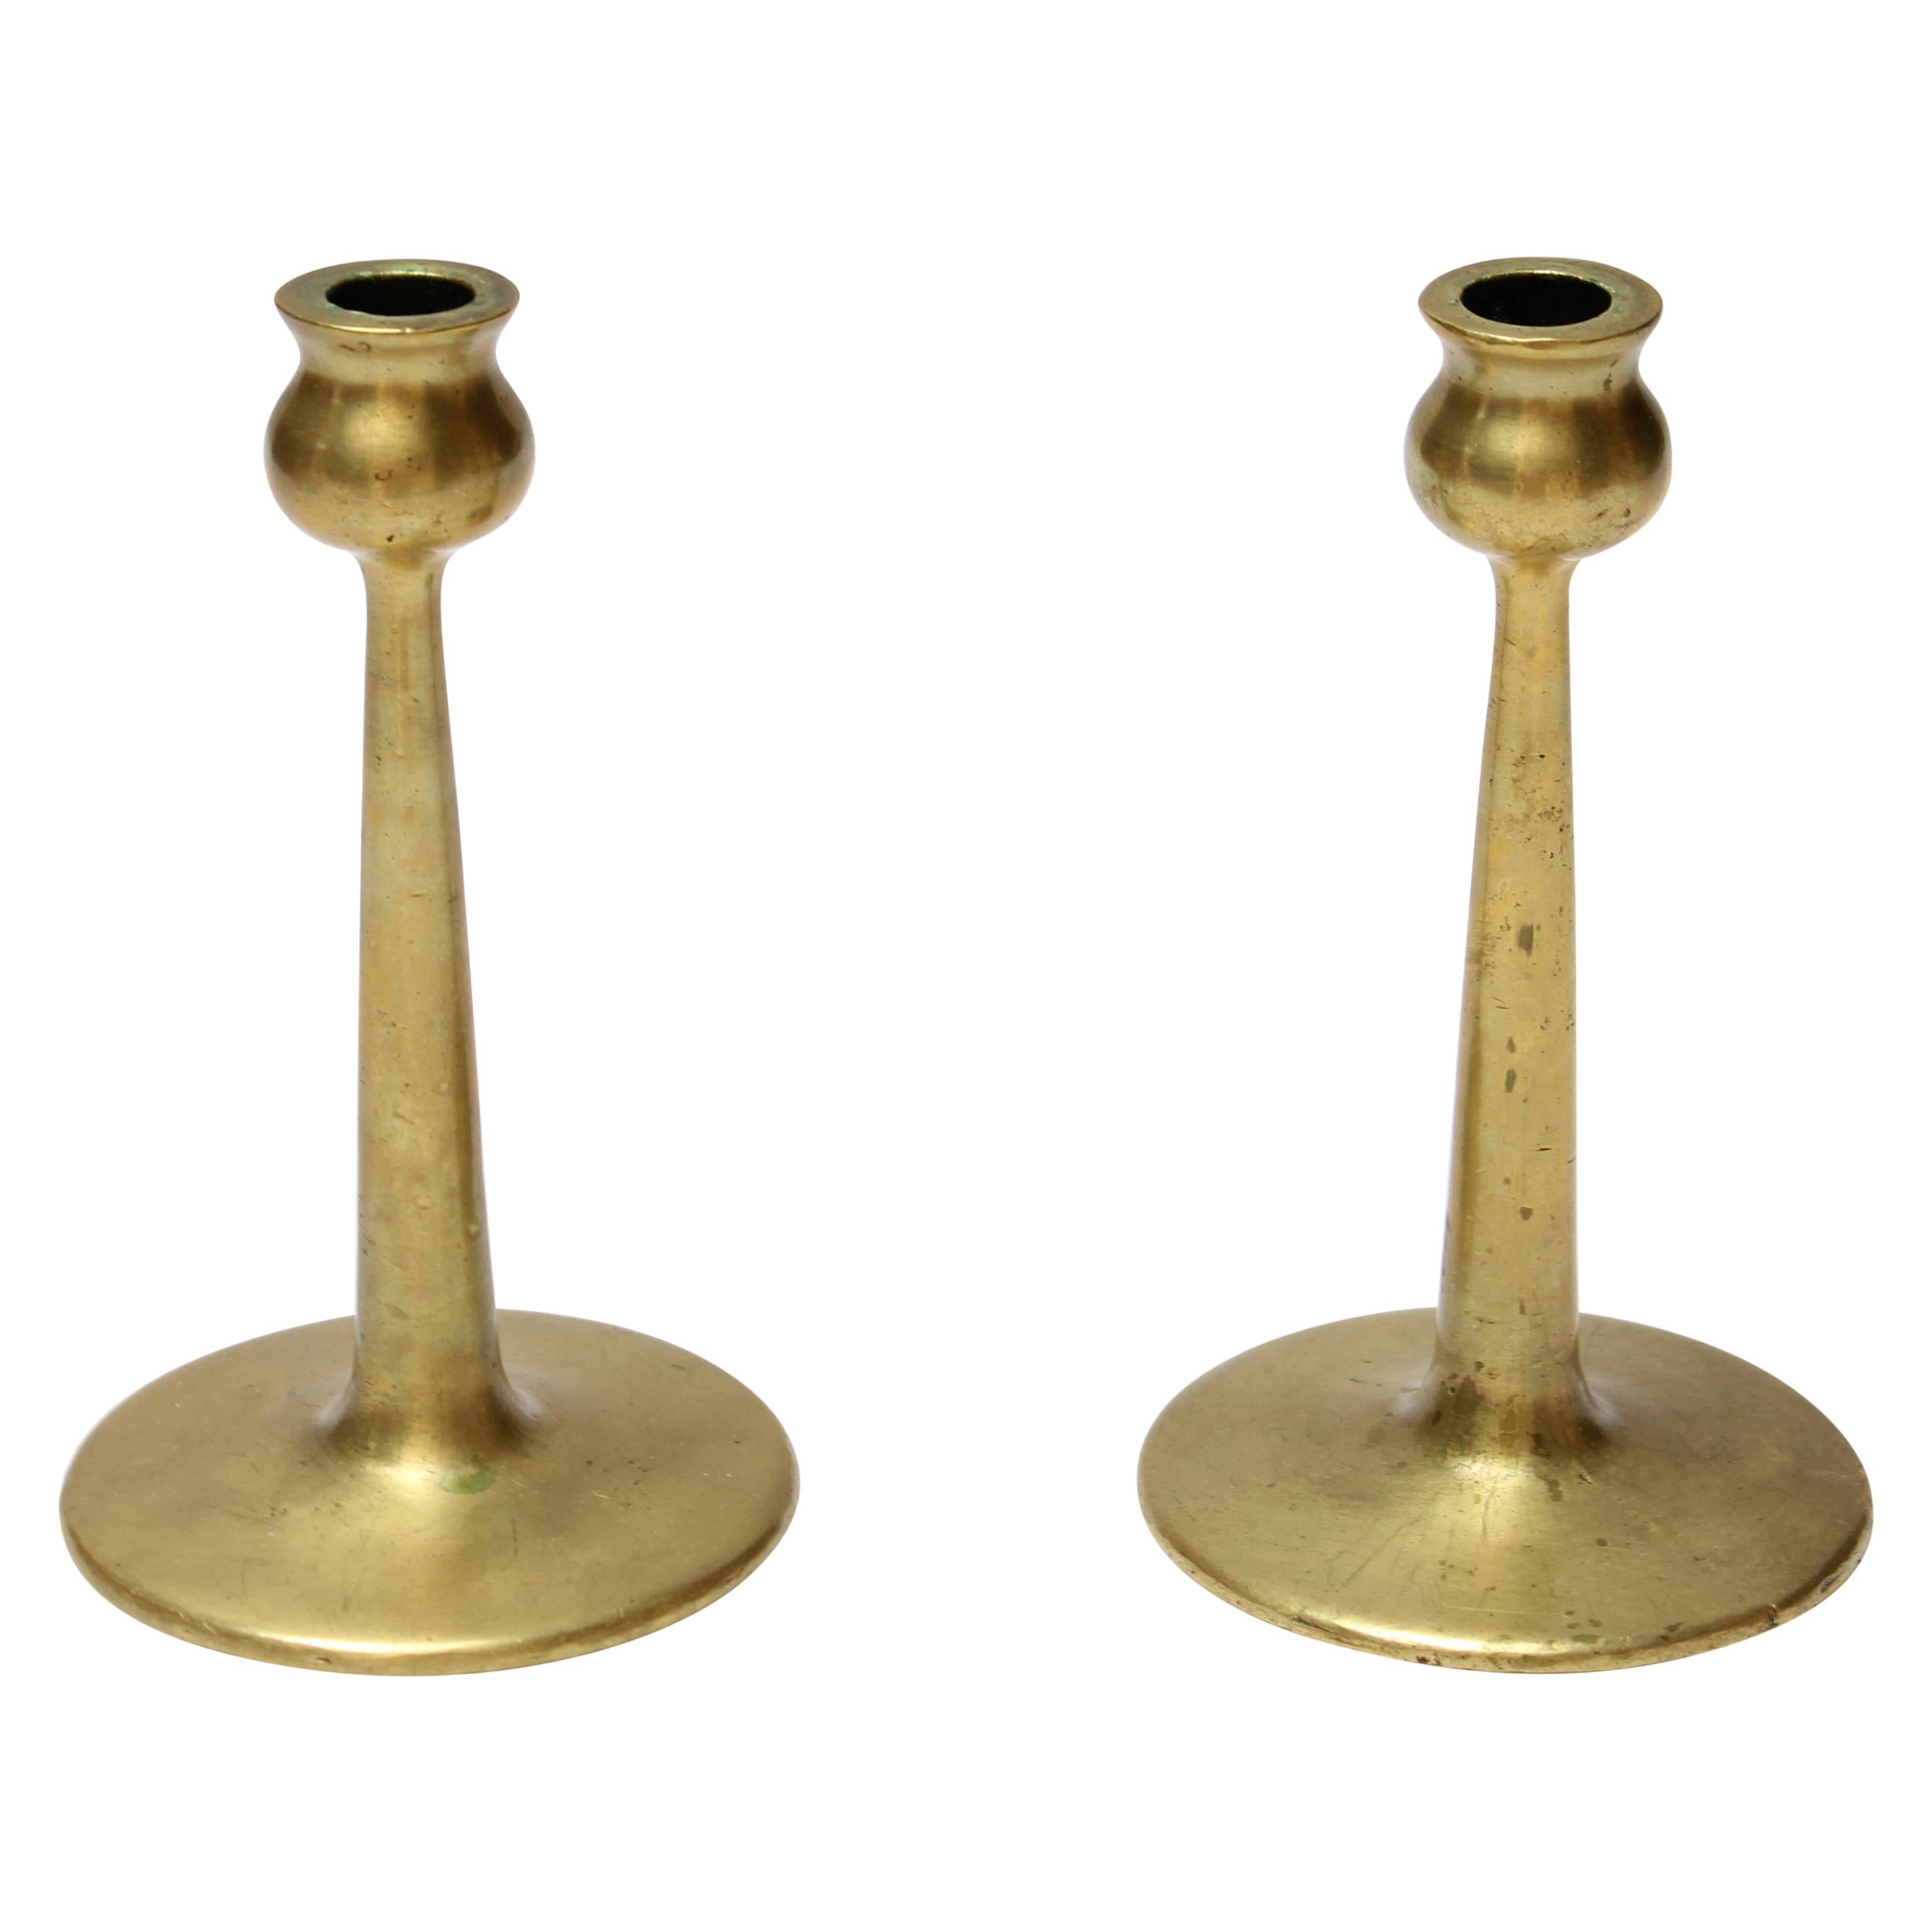 Pair of Petite Mid-Century Modern Turned Brass Candlesticks after Jarvie For Sale